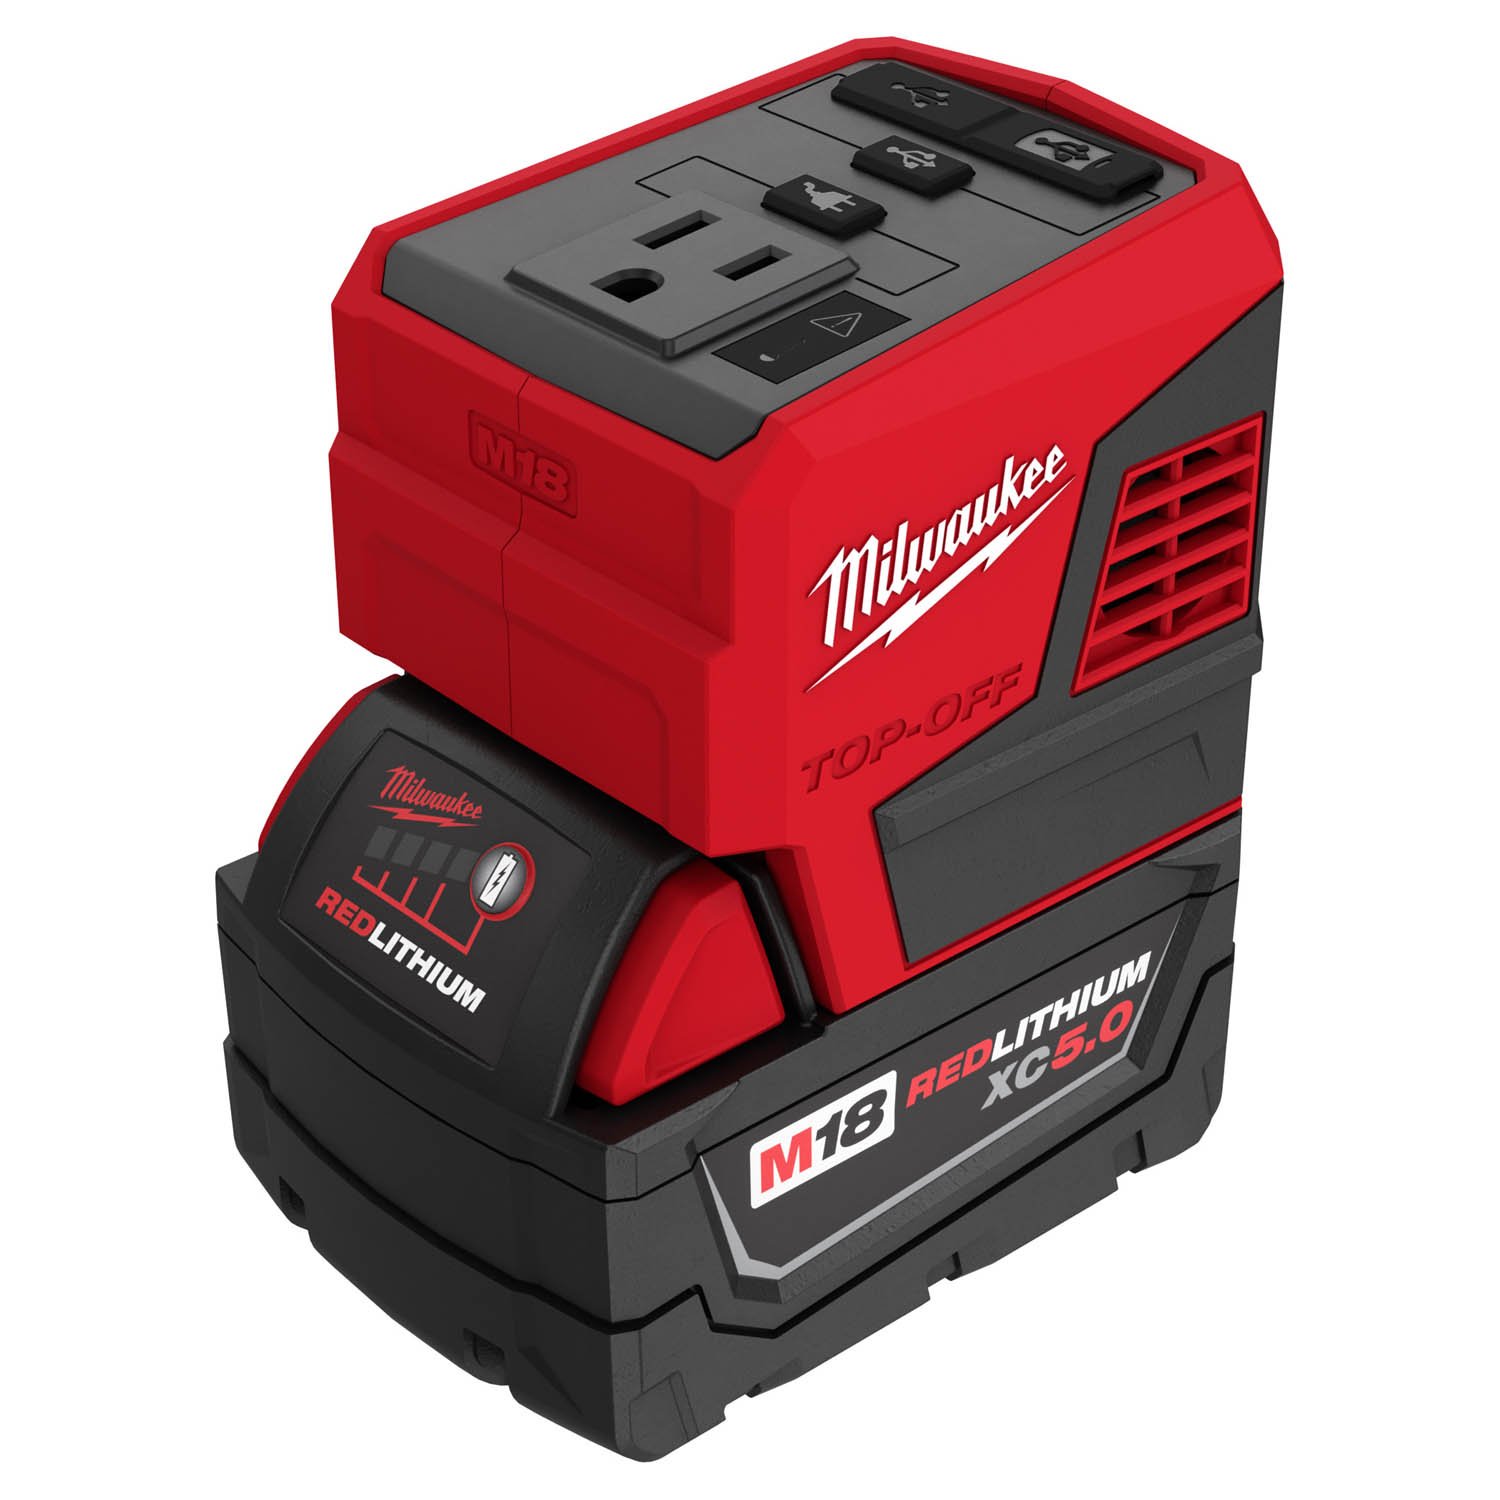 M18 TOP-OFF 175W POWER SUPPLY WITH M18 REDLITHIUM XC5.0 BATTERY